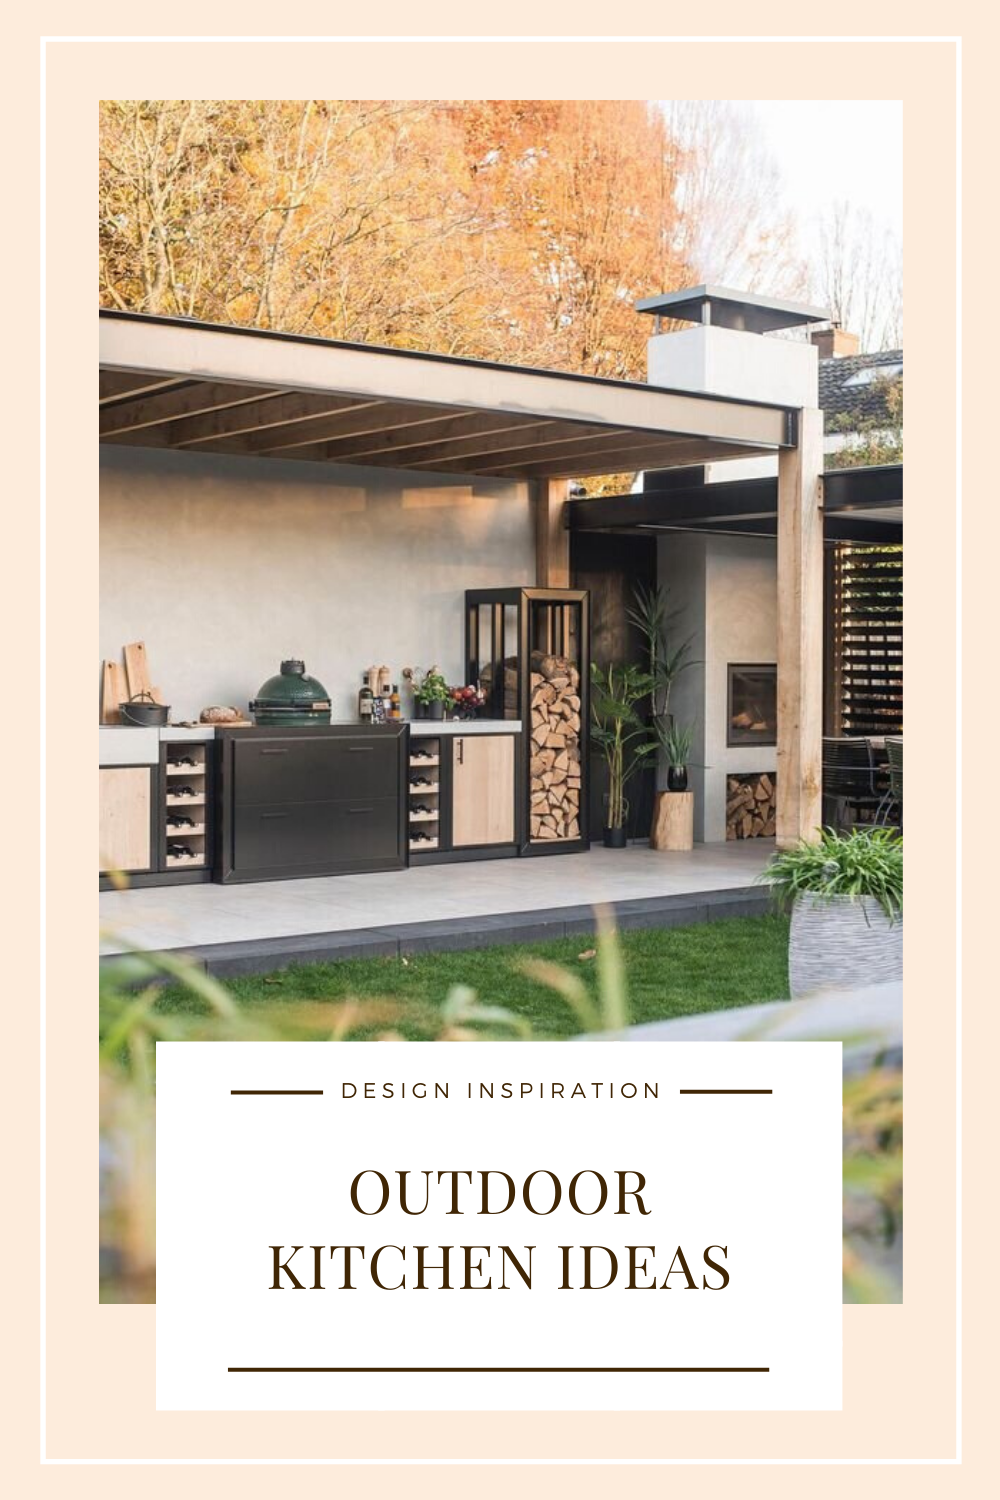 Outdoor Kitchen Ideas & Design Inspiration for our StoneHouse ...